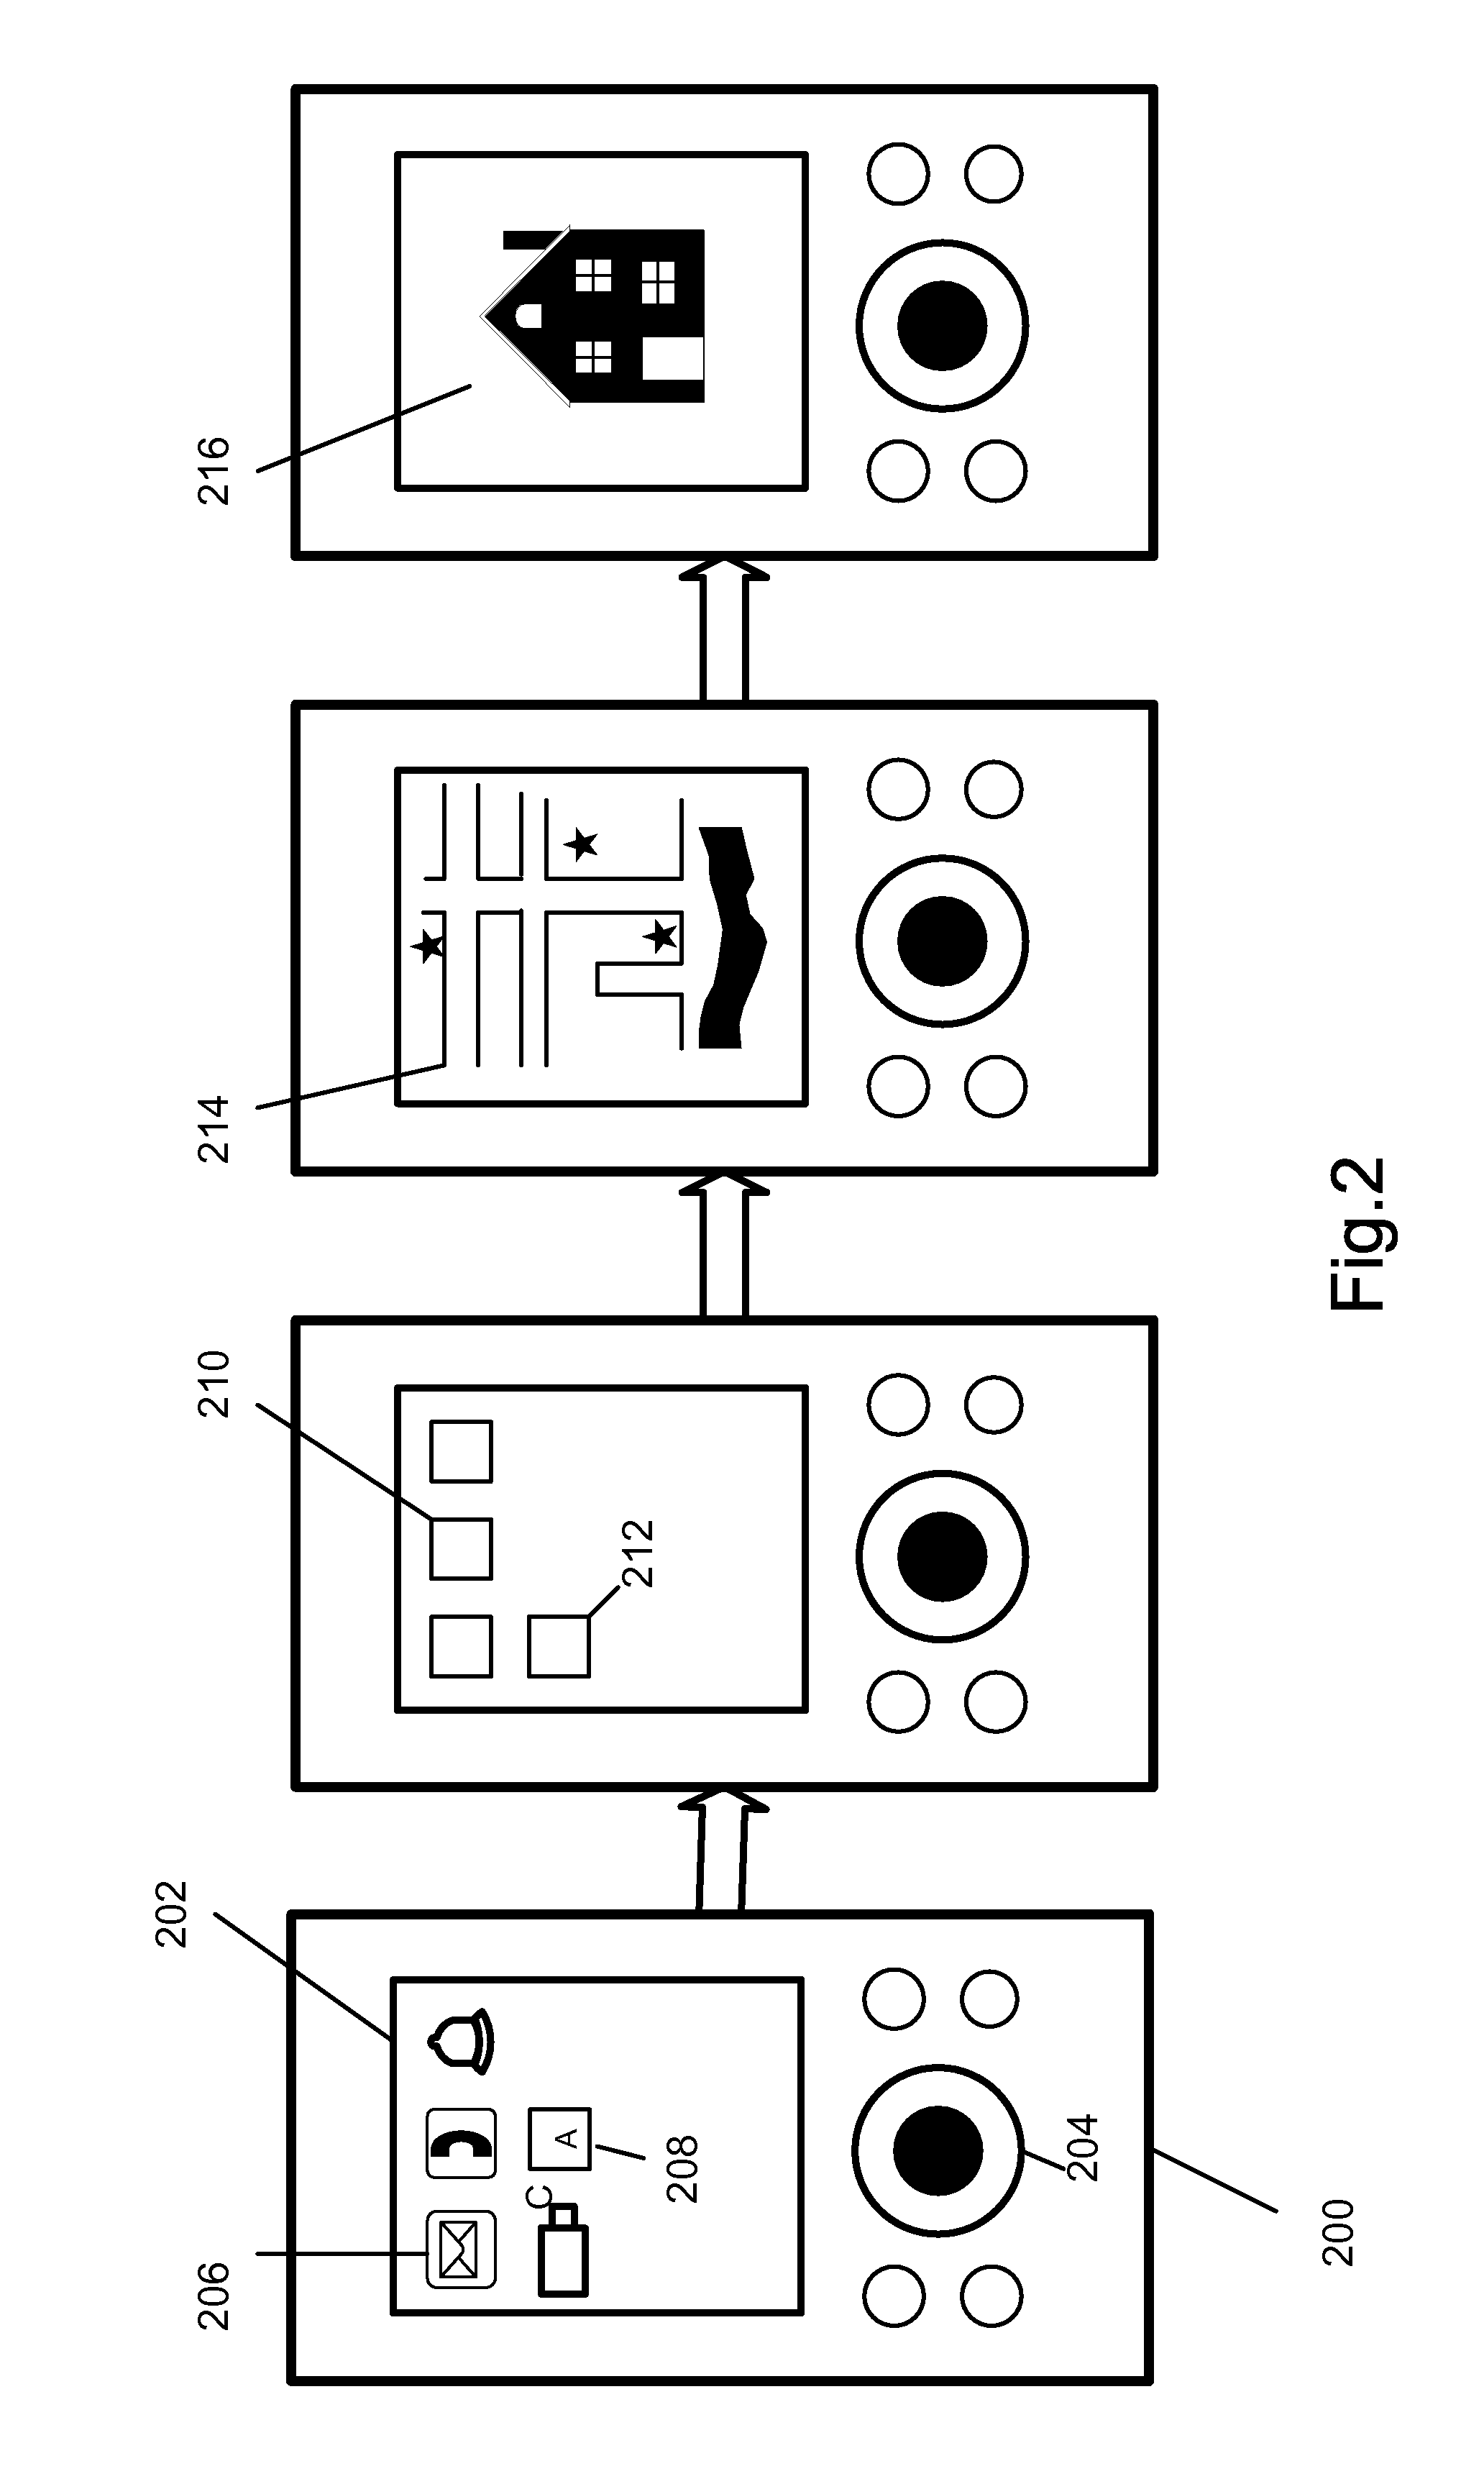 Hierarchical User Interfaces for Advertisement Messages in a Mobile Device